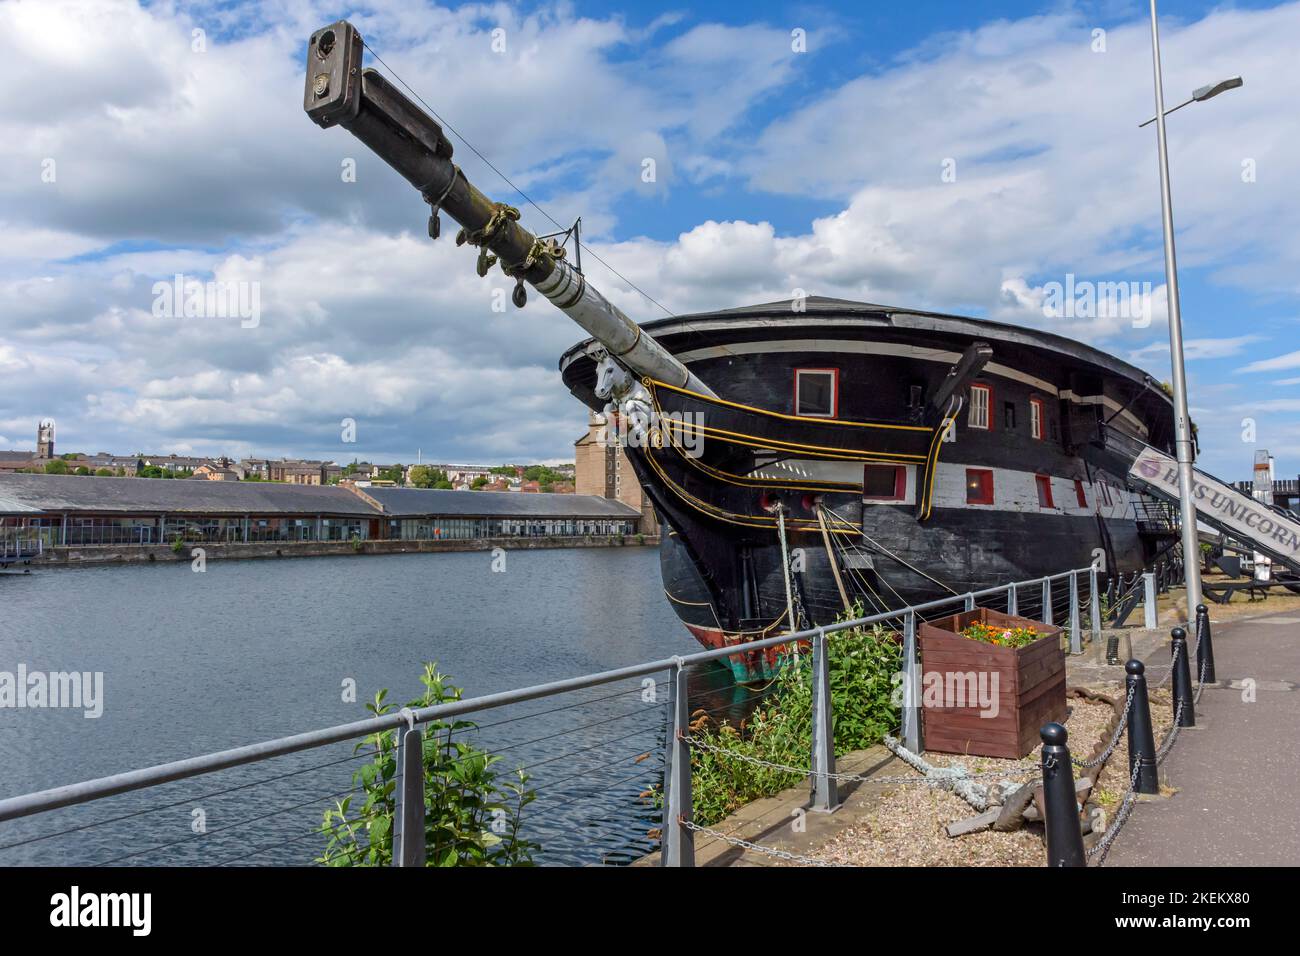 The frigate HMS Unicorn.  Built for the Royal Navy and launched in 1824.  West Victoria Dock, Dundee, Scotland, UK Stock Photo